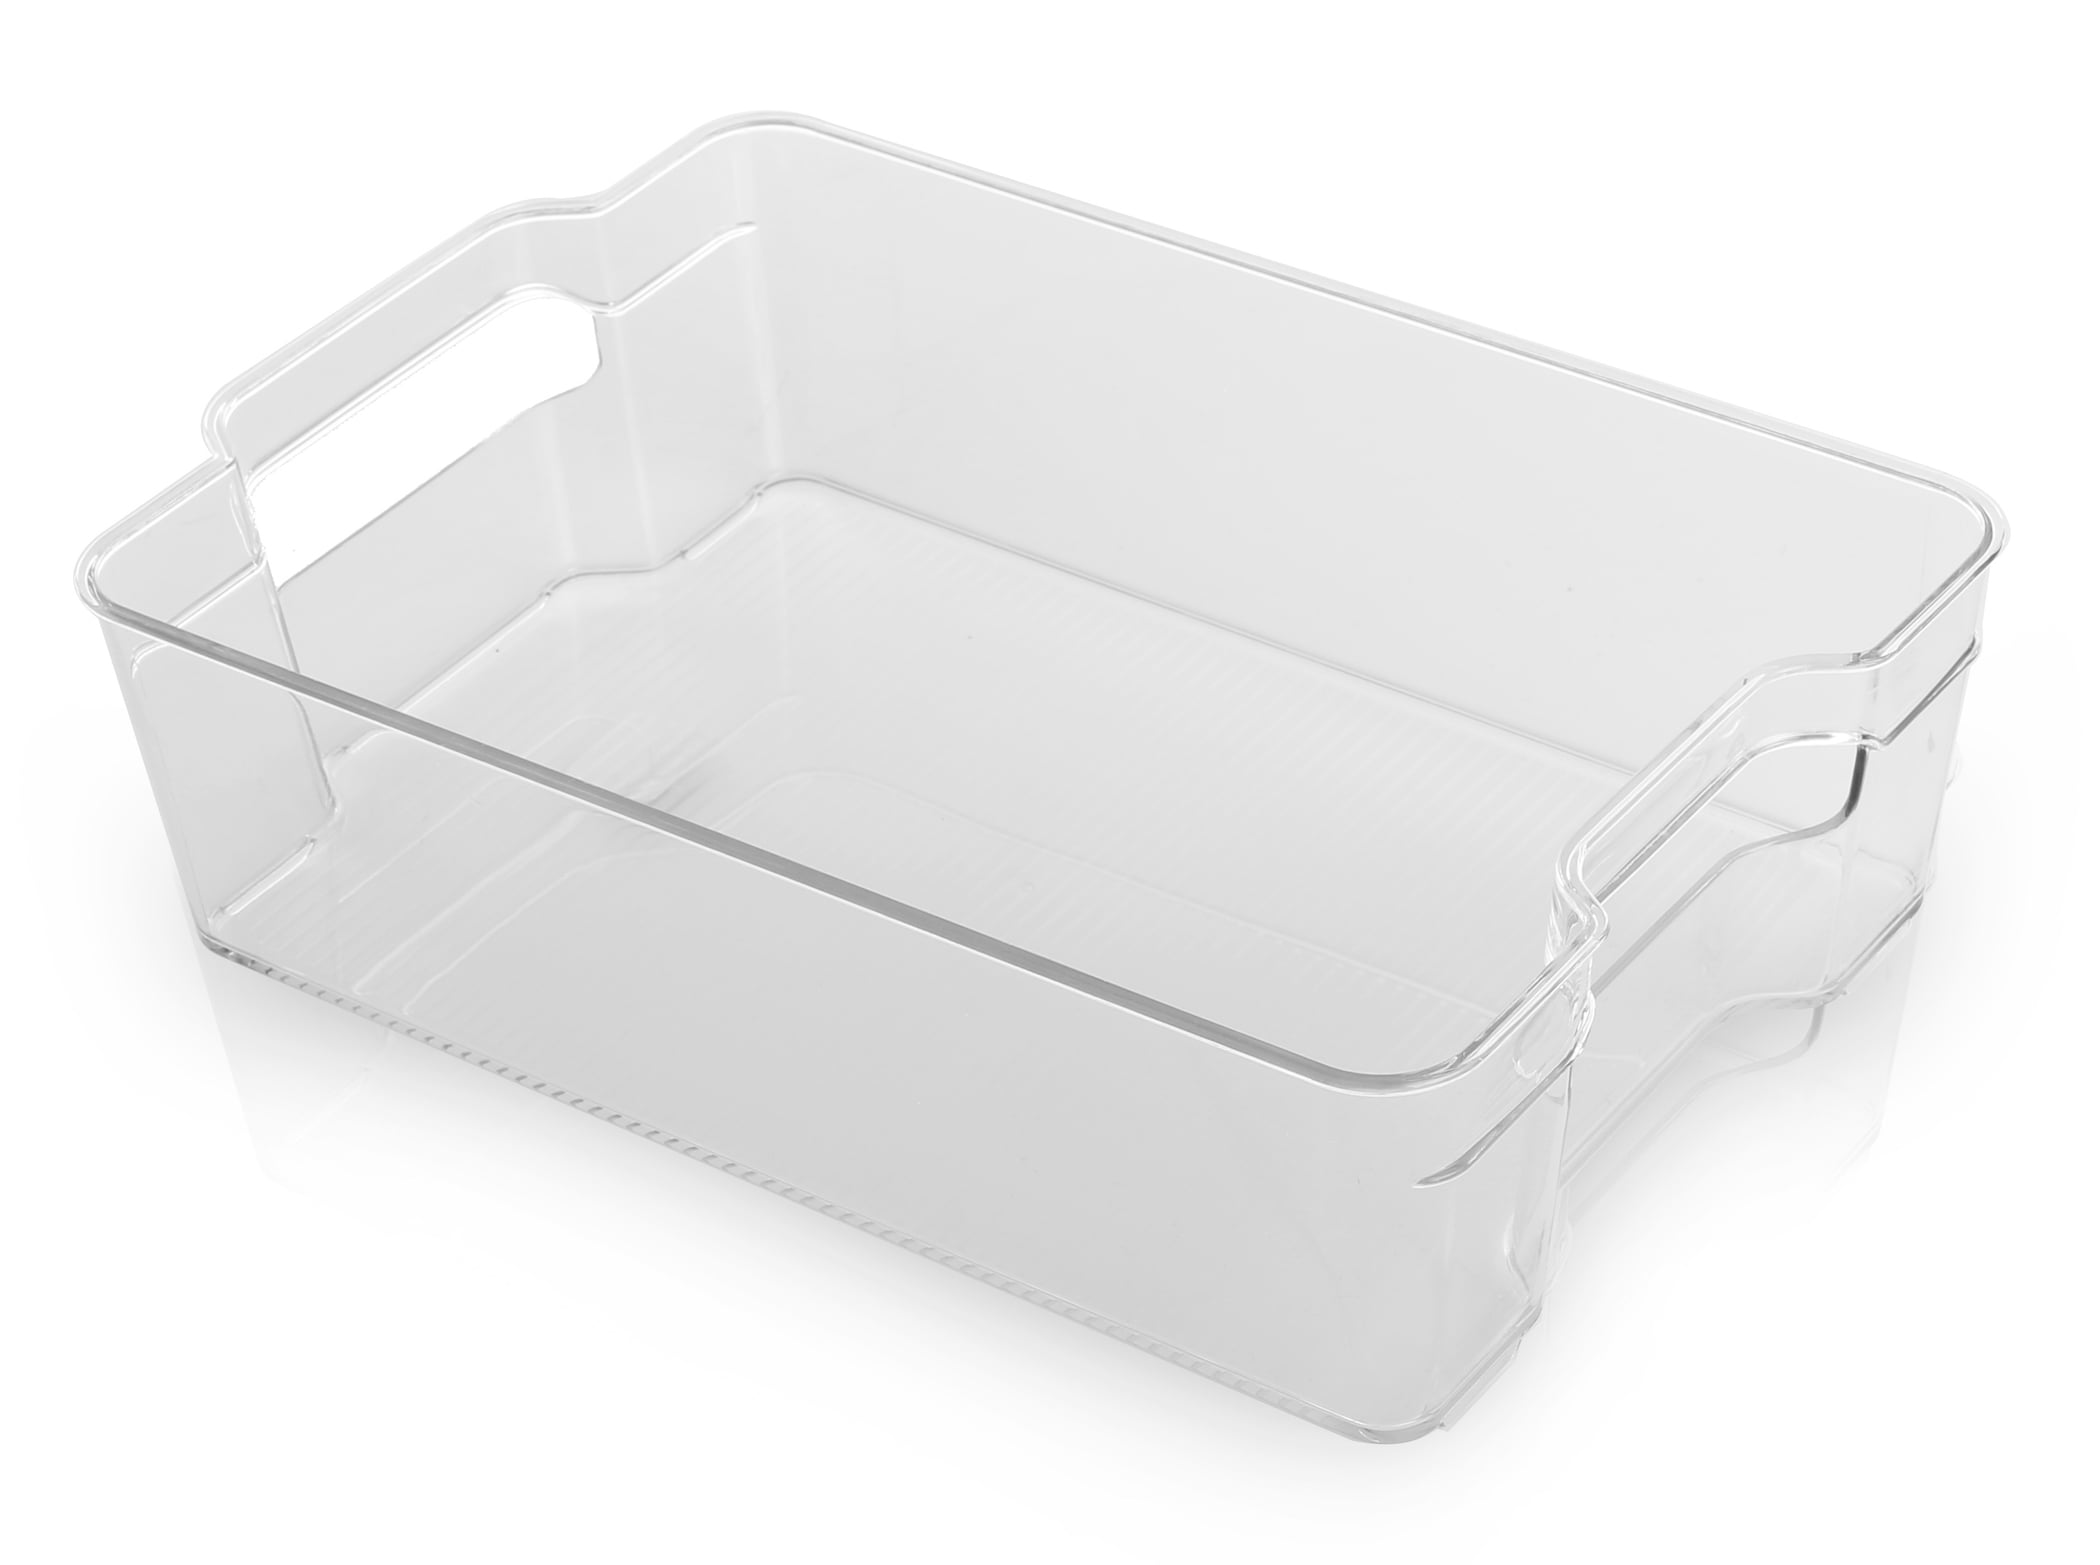 FEOOWV Small Plastic Storage Baskets, 8 Pack, White, Portable, Stackable,  Multipurpose, BPA Free, Ideal for Pantry, Fridge, Closet, Bedroom, Office